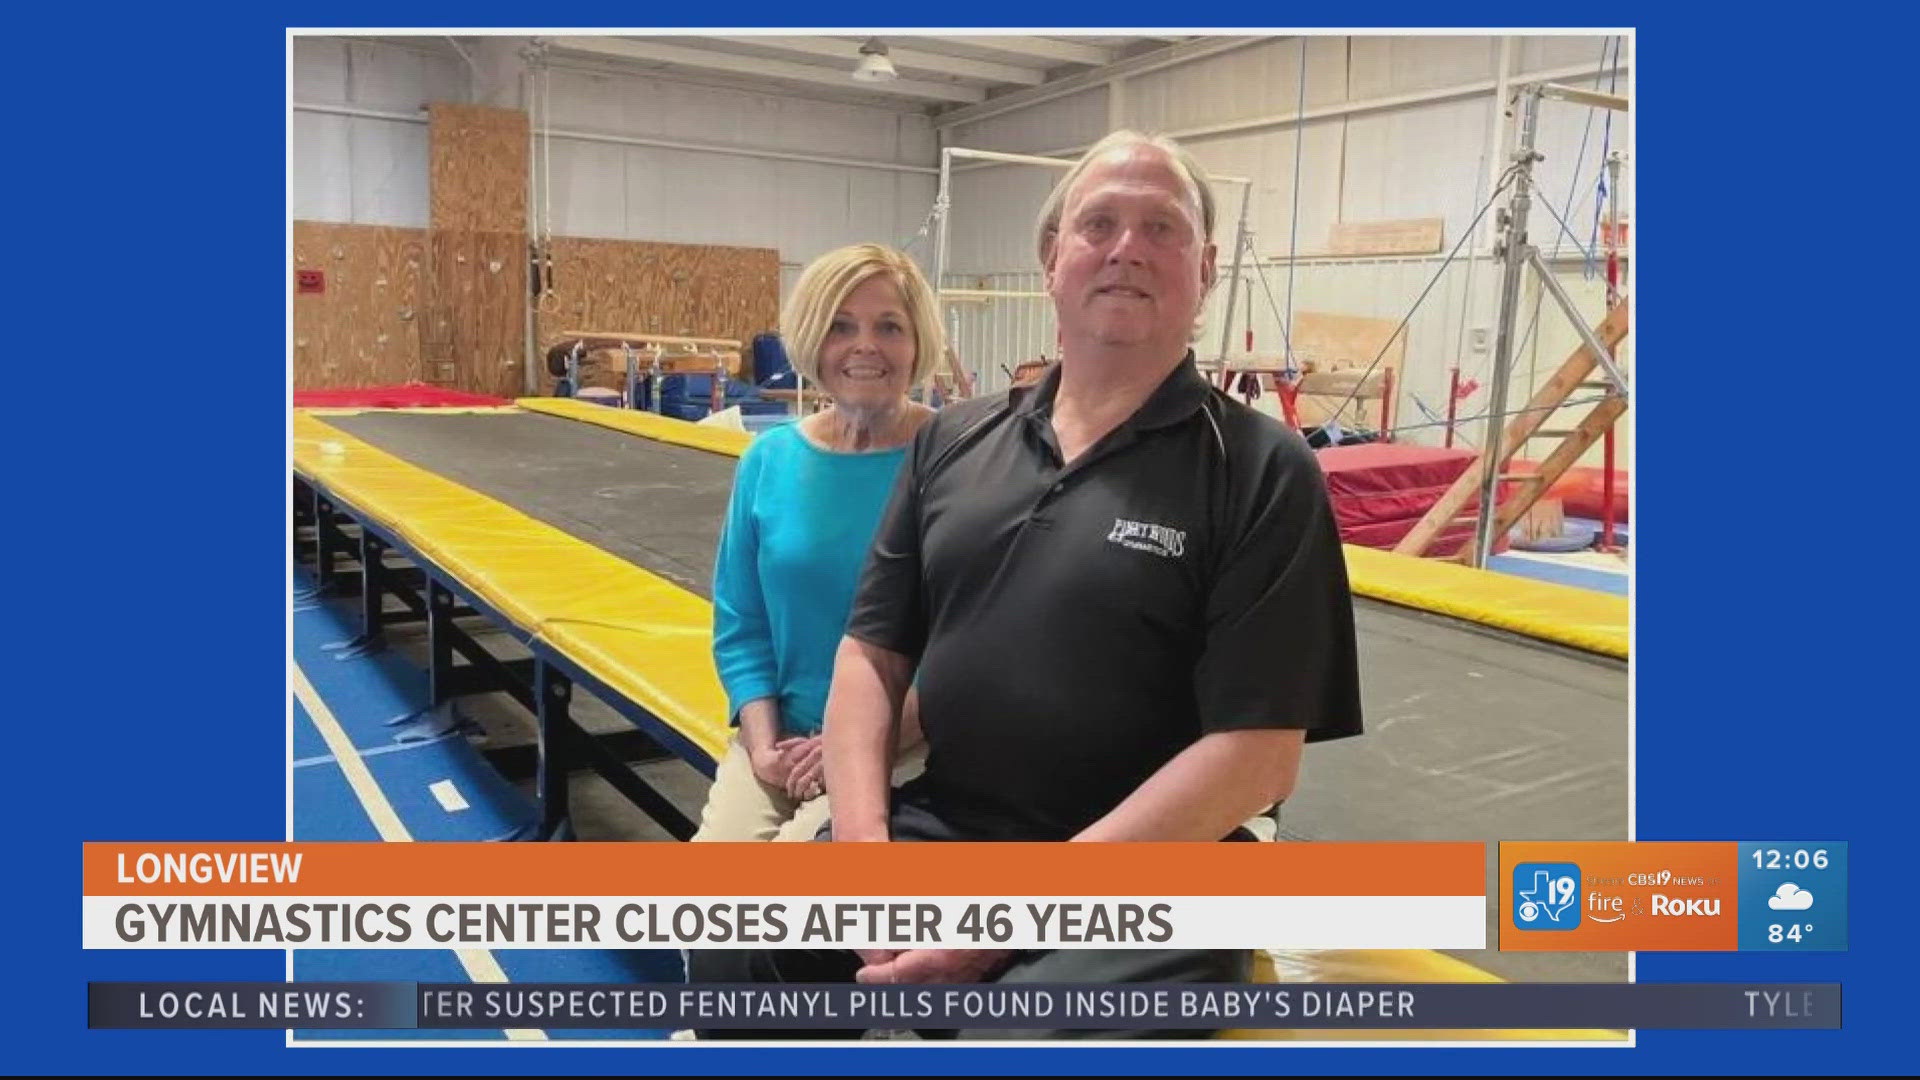 Piney Woods Gymnastics Center in Longview closes after nearly 50 years in business